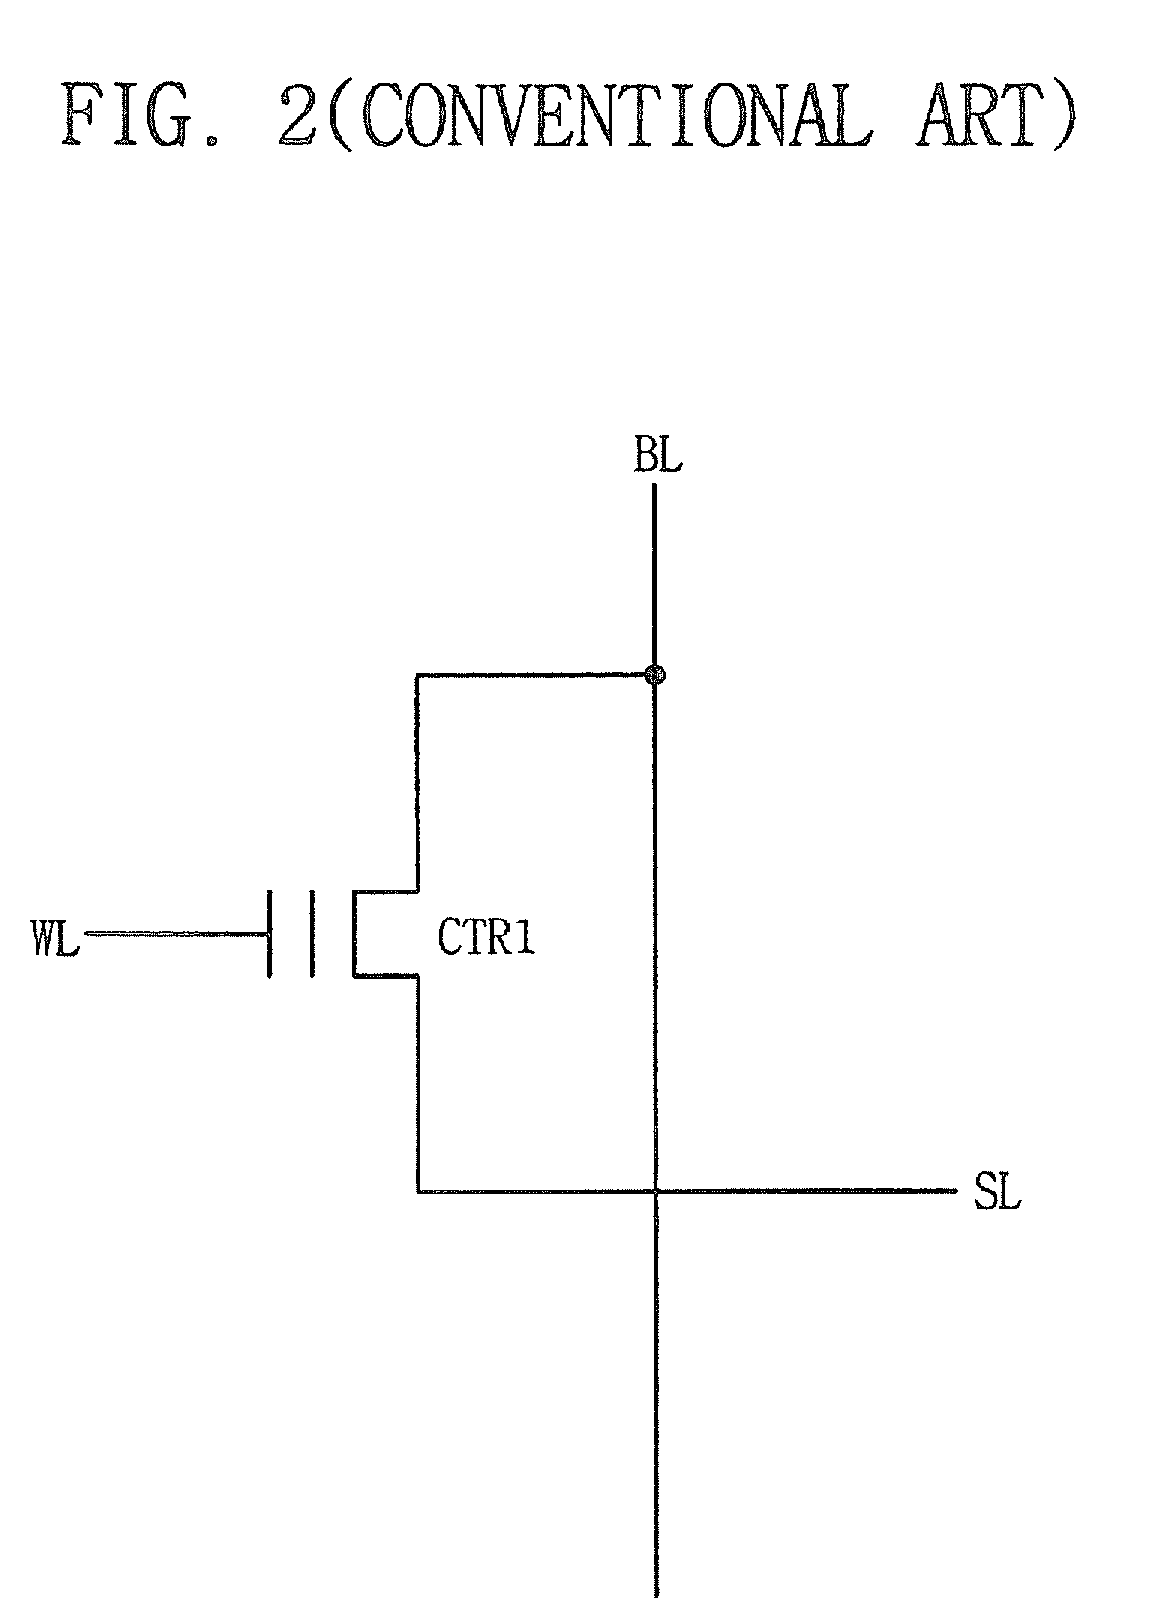 Decoders and decoding methods for nonvolatile semiconductor memory devices